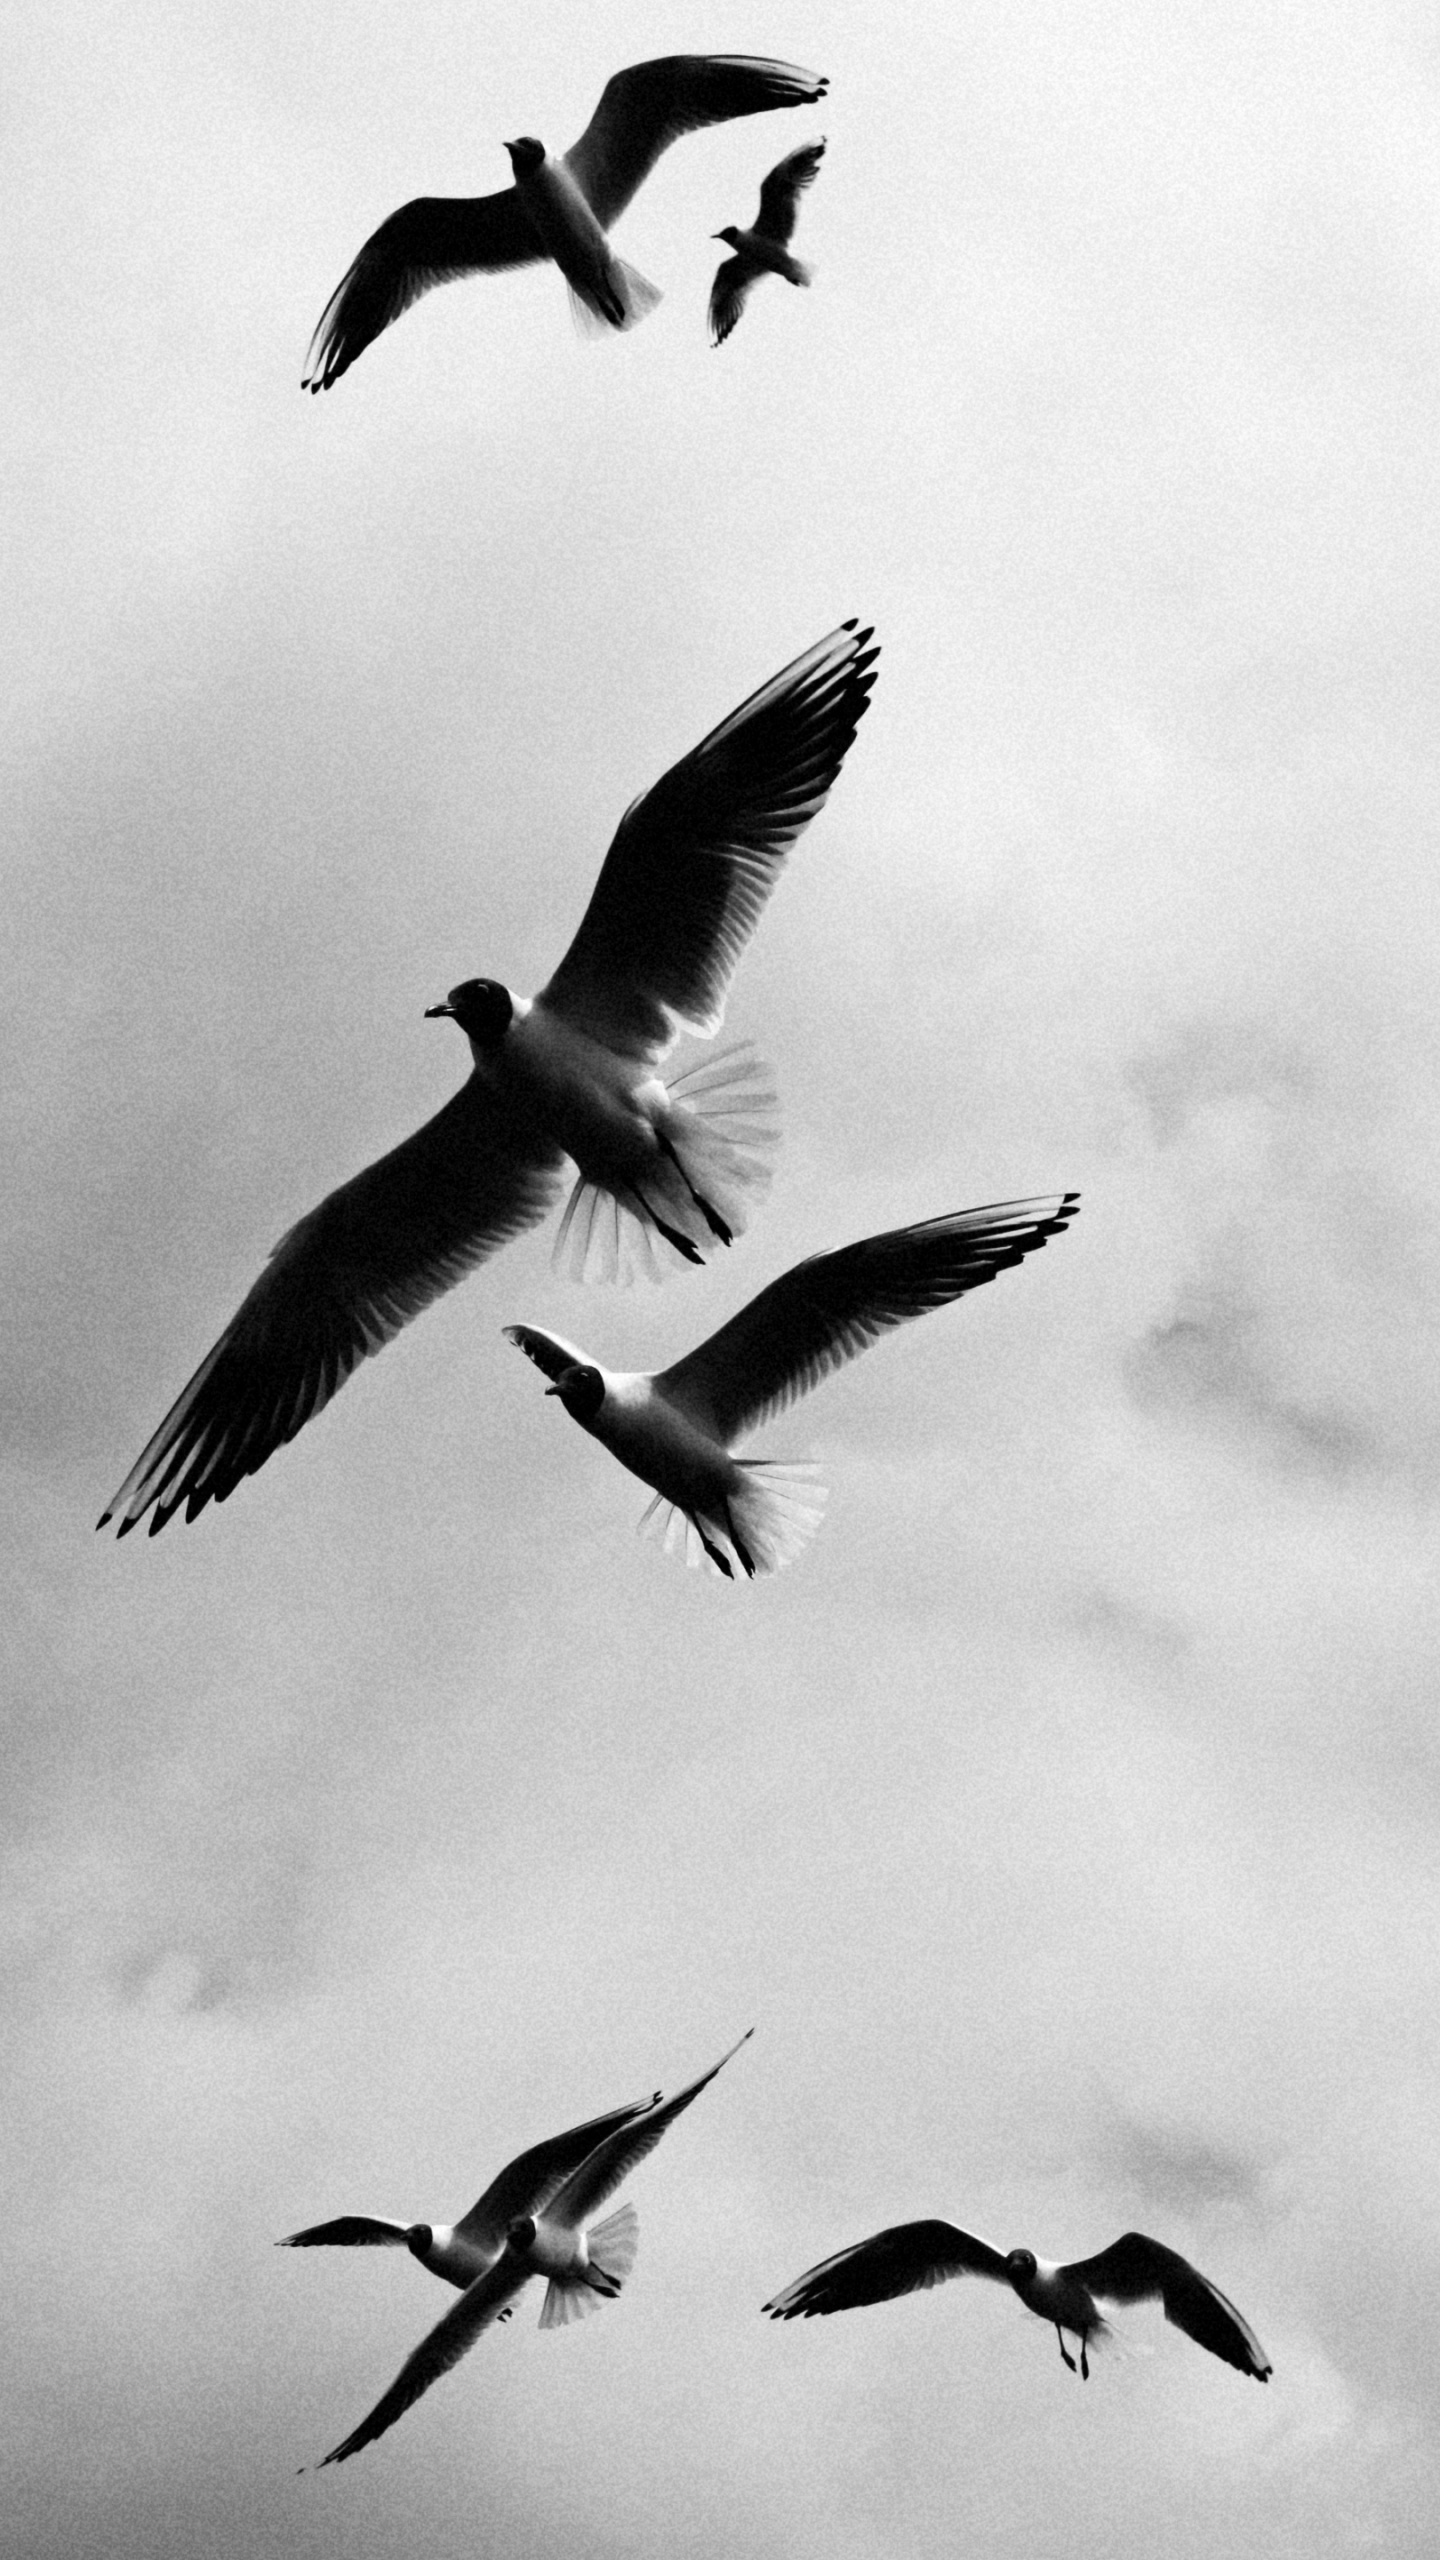 Grayscale Photography of Birds Flying. Wallpaper in 1440x2560 Resolution